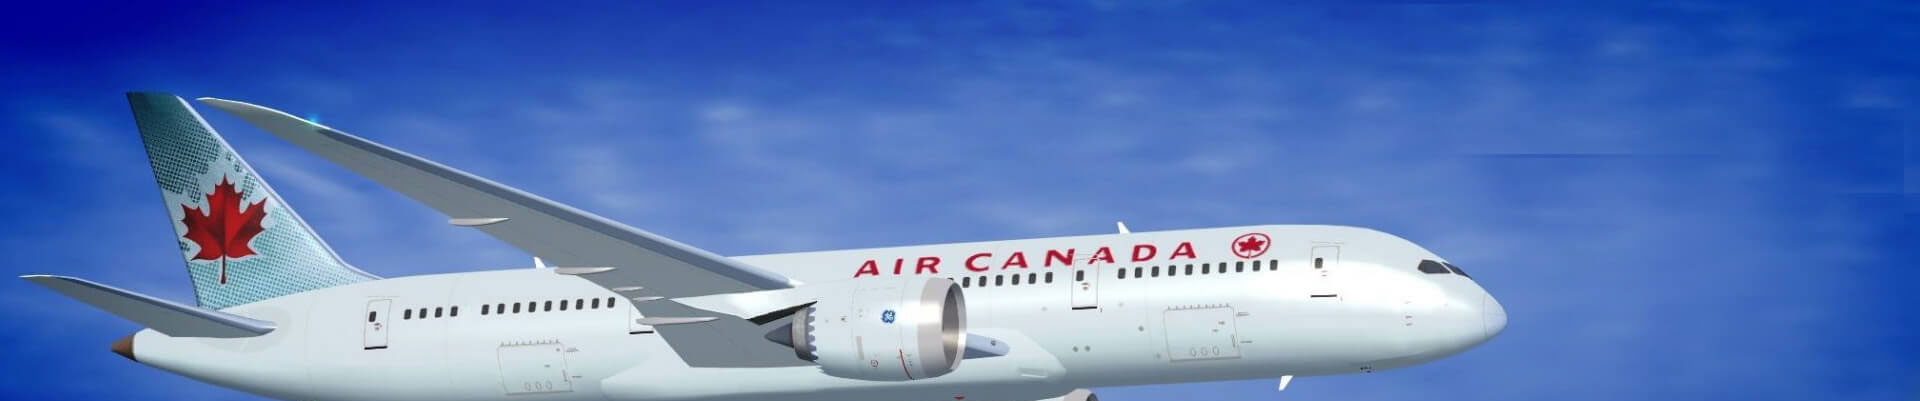 Air Canada | Book Our Flights Online & Save | Low-Fares